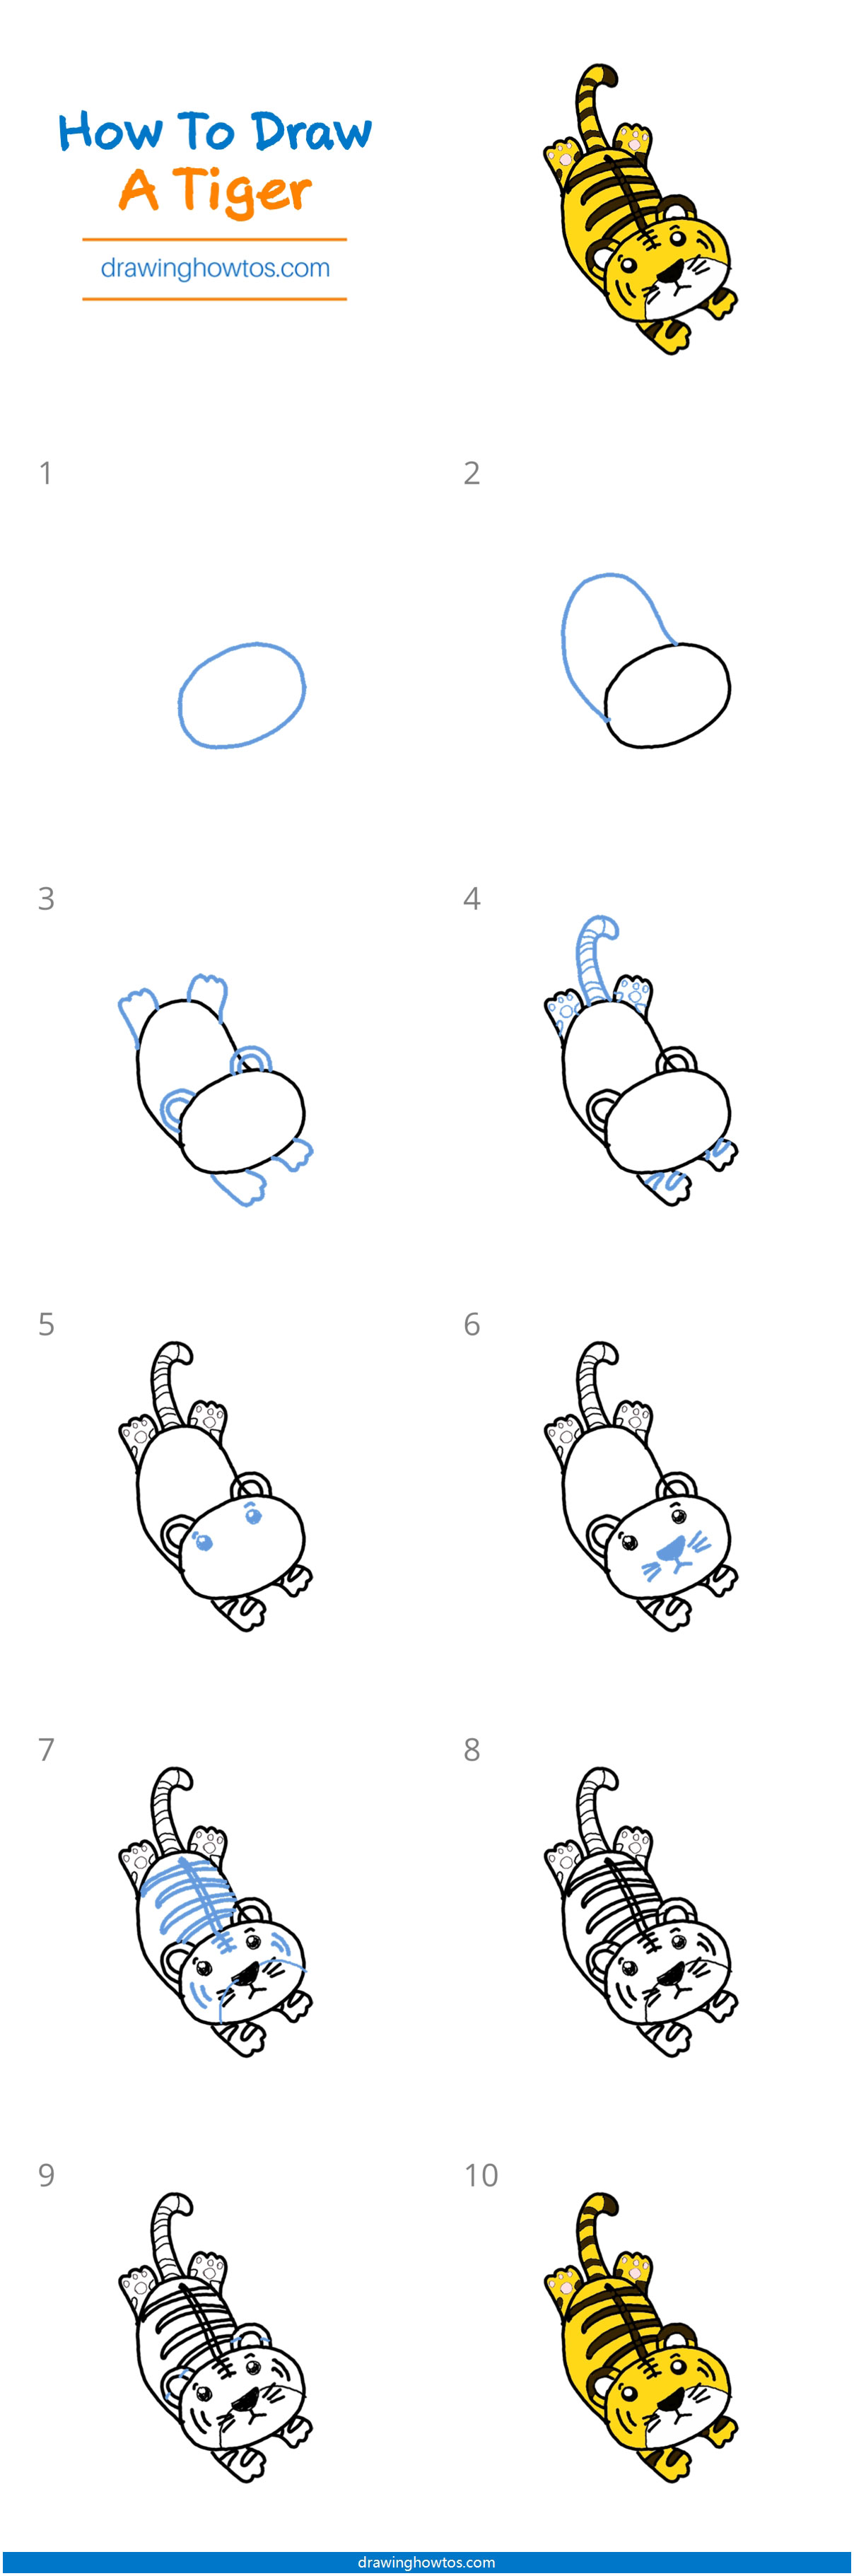 How to Draw a Tiger Step by Step